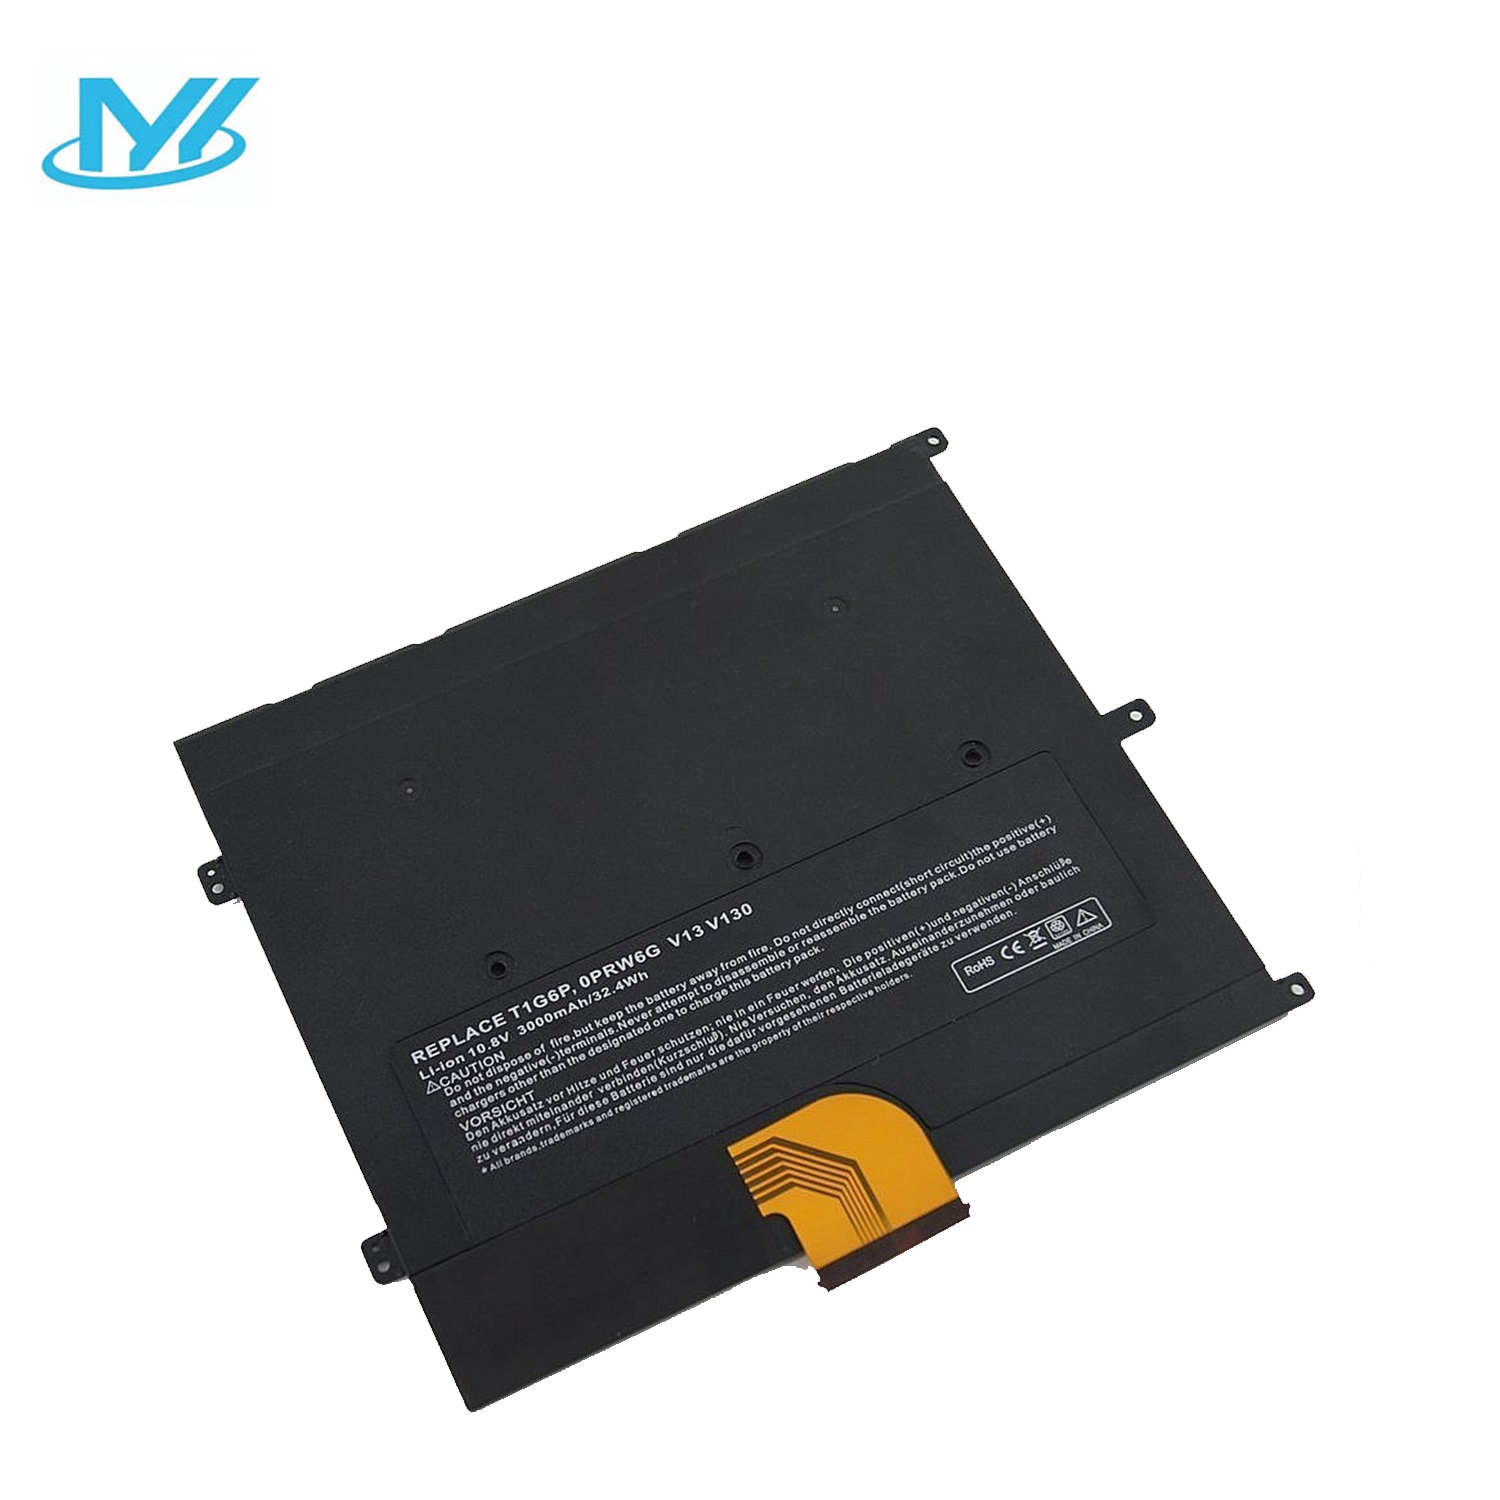 T1G6P rechargeable lithium ion Notebook battery Laptop battery CN-0449TX NTG4J ONTG4 PRW6G OPRW6G 0449TX 11.1 V 30Wh for Dell laptop Vostro 13 130 V13 V130 V1300 V13Z P08S P16S